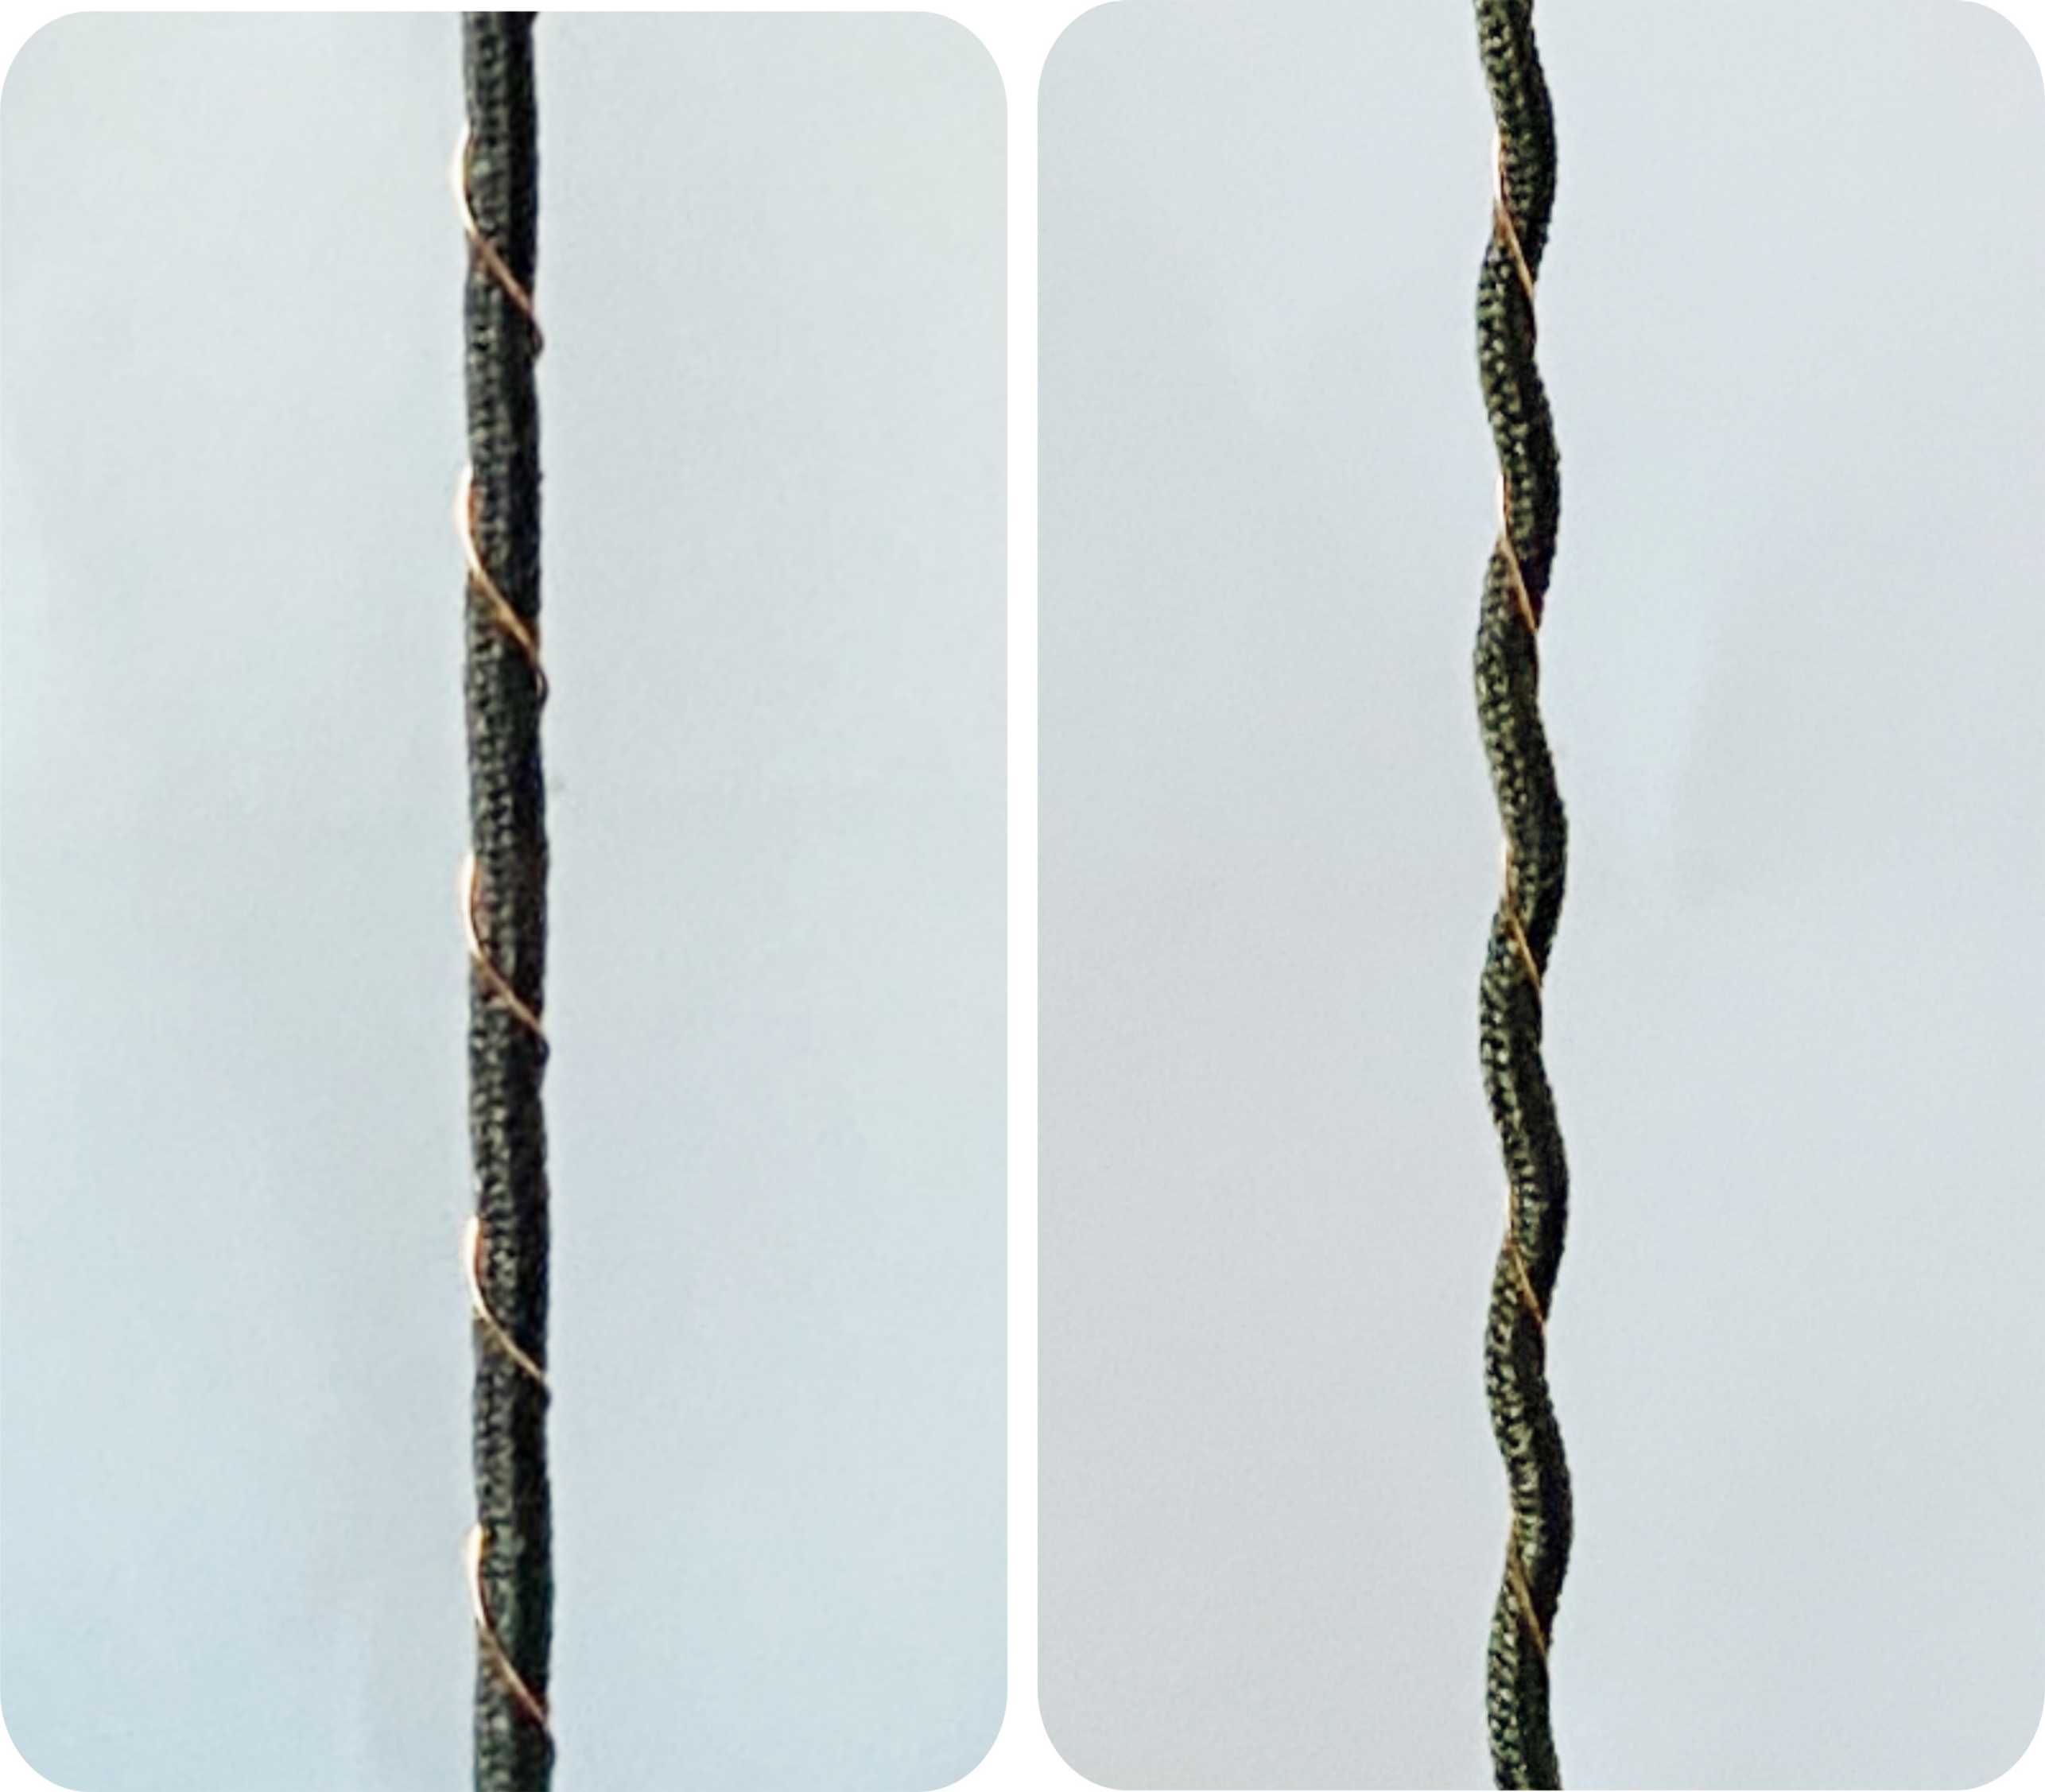 Enlarged view: Left: the yarn with conductive rubber statically straight, Right: the yarn with conductive rubber spirally under tension.